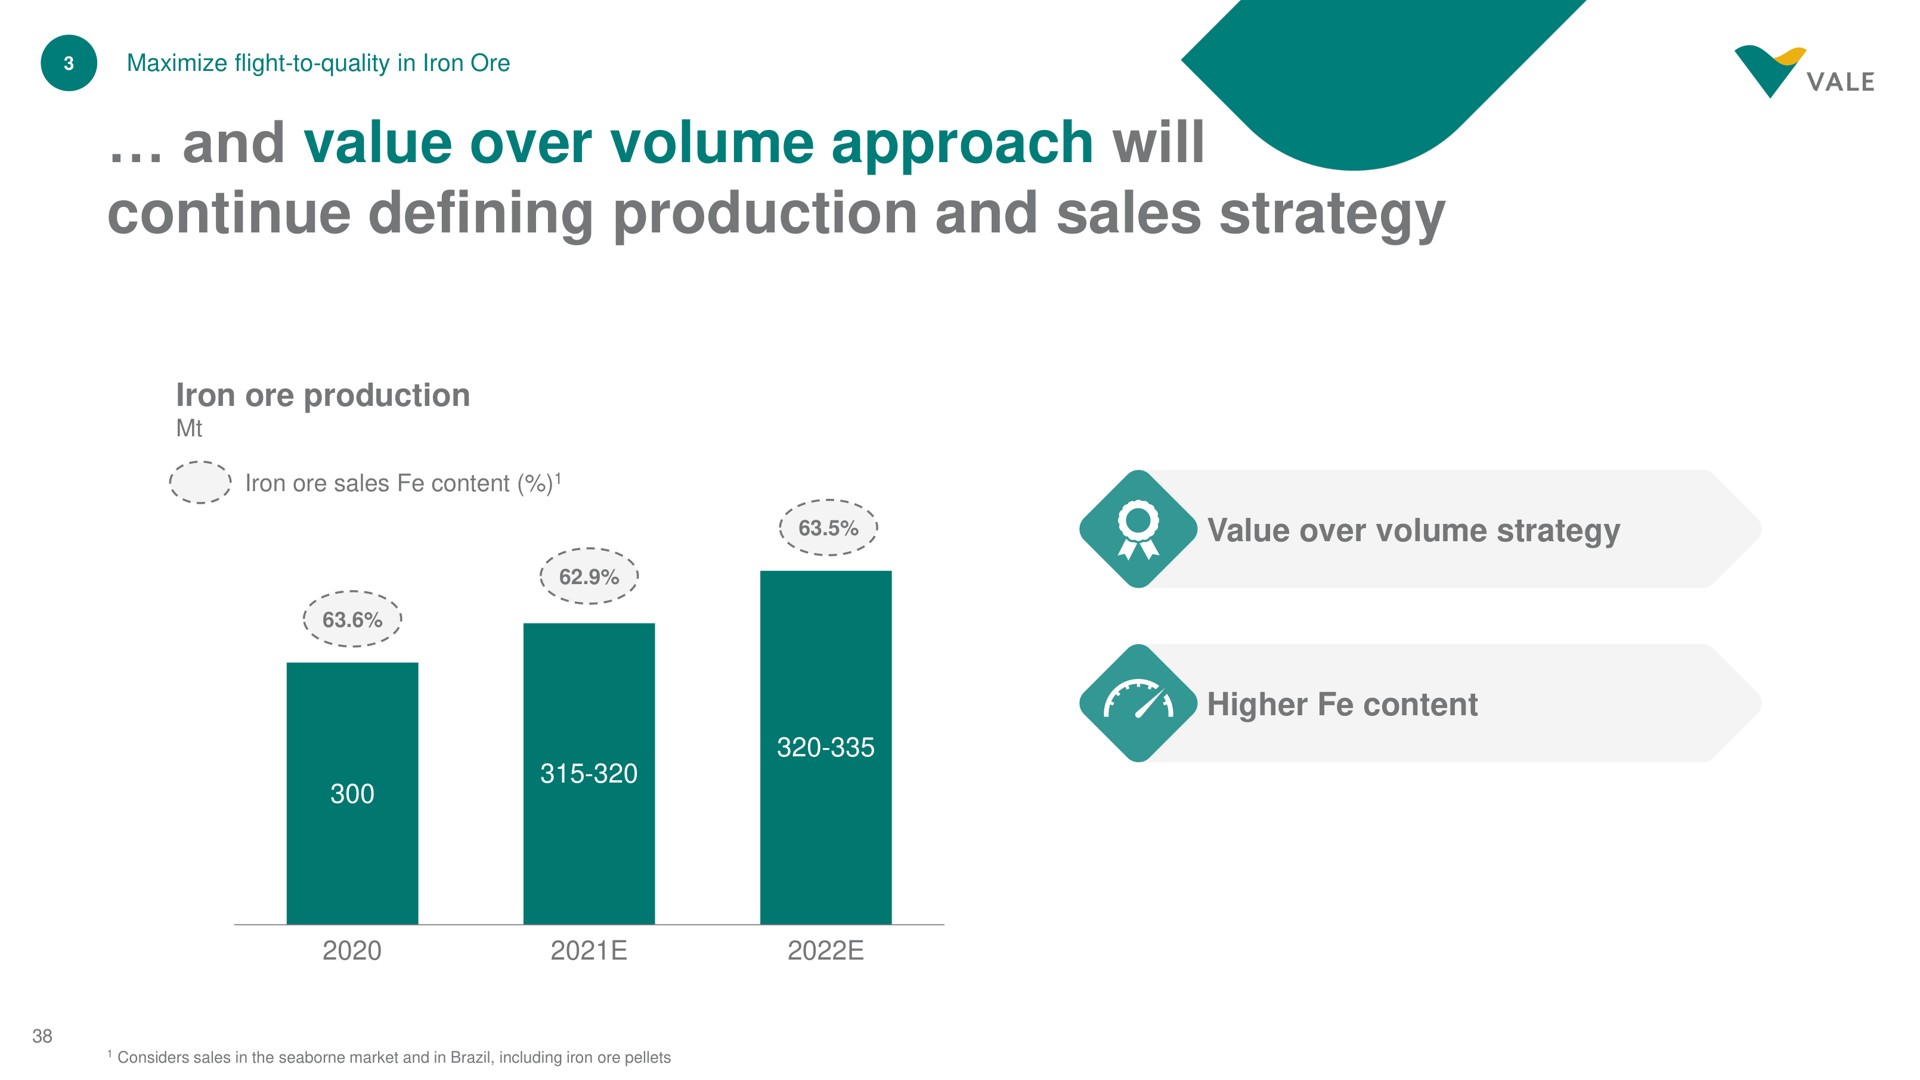 and value over volume approach will continue defining production and sales strategy | Vale